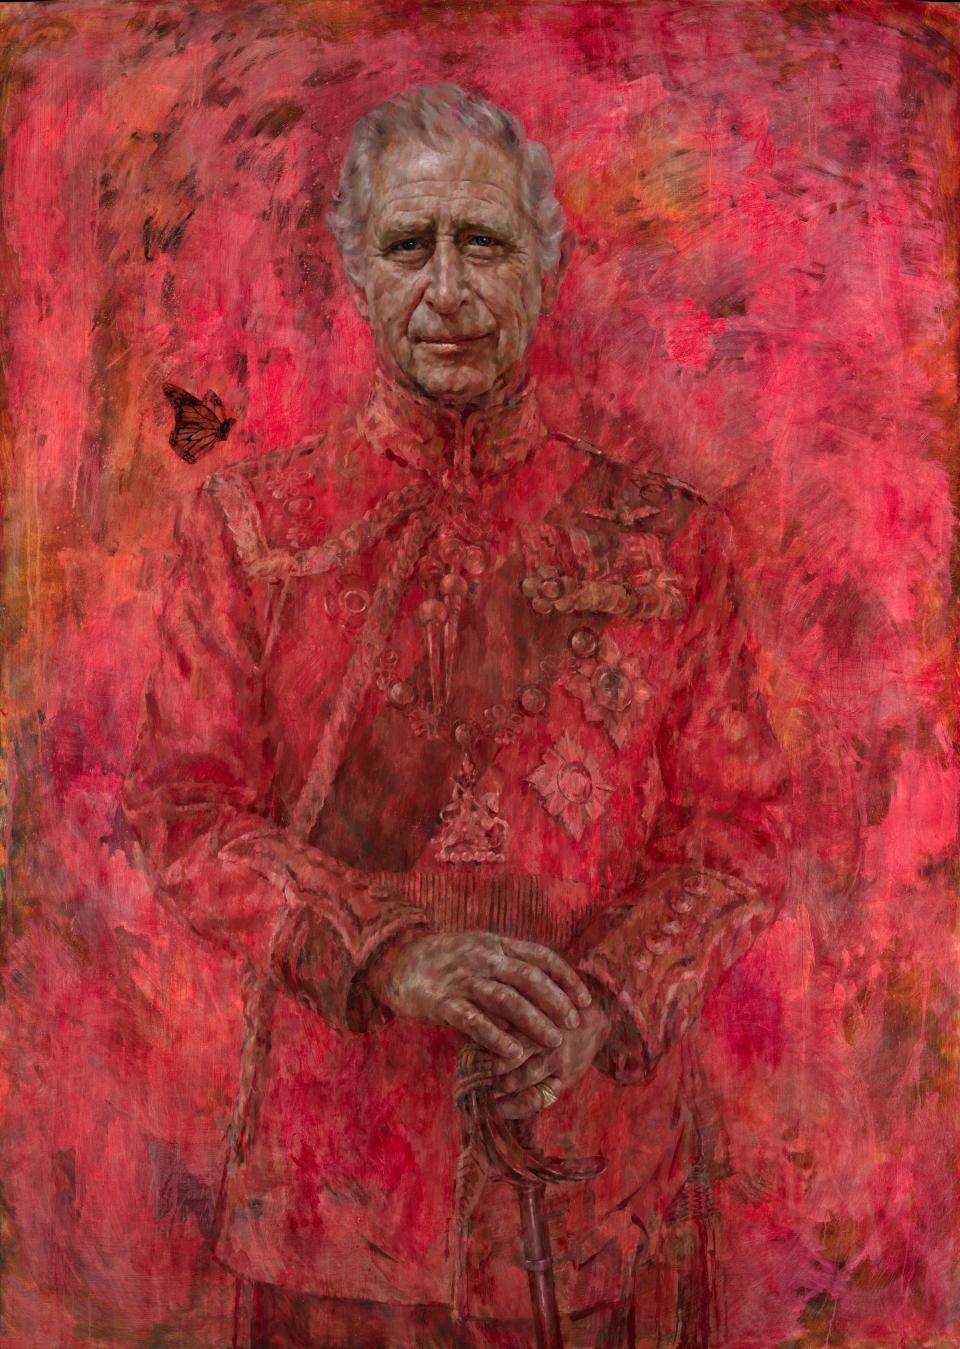 The artist said the background was intented to distract from the King’s Welsh Guards uniform (His Majesty King Charles III by Jonathan Yeo 2024/PA Wire)